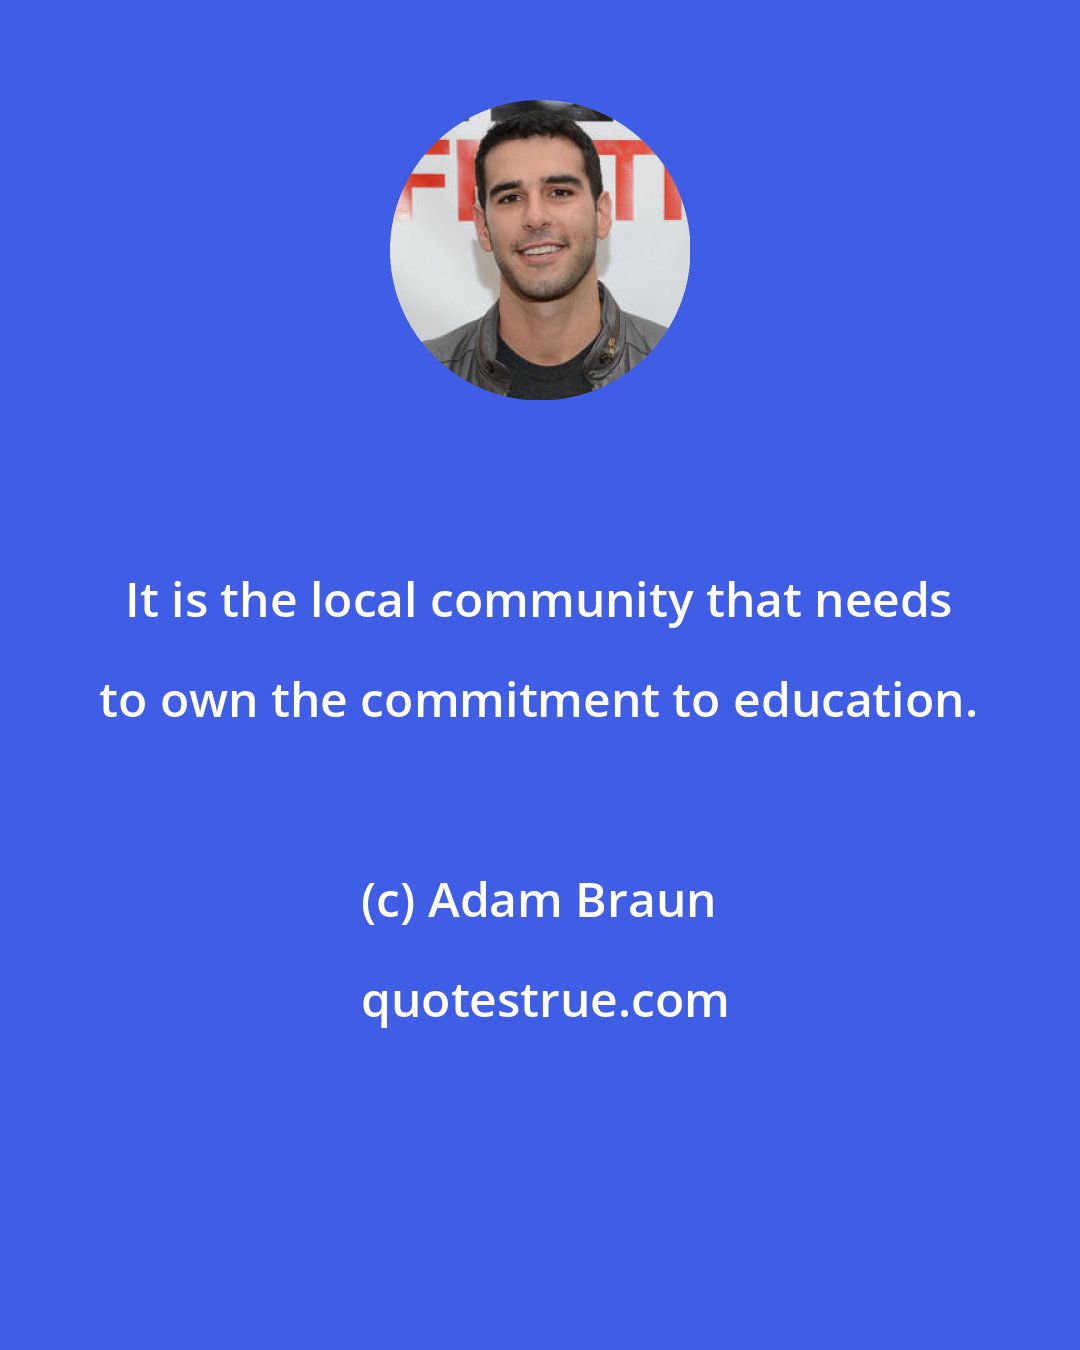 Adam Braun: It is the local community that needs to own the commitment to education.